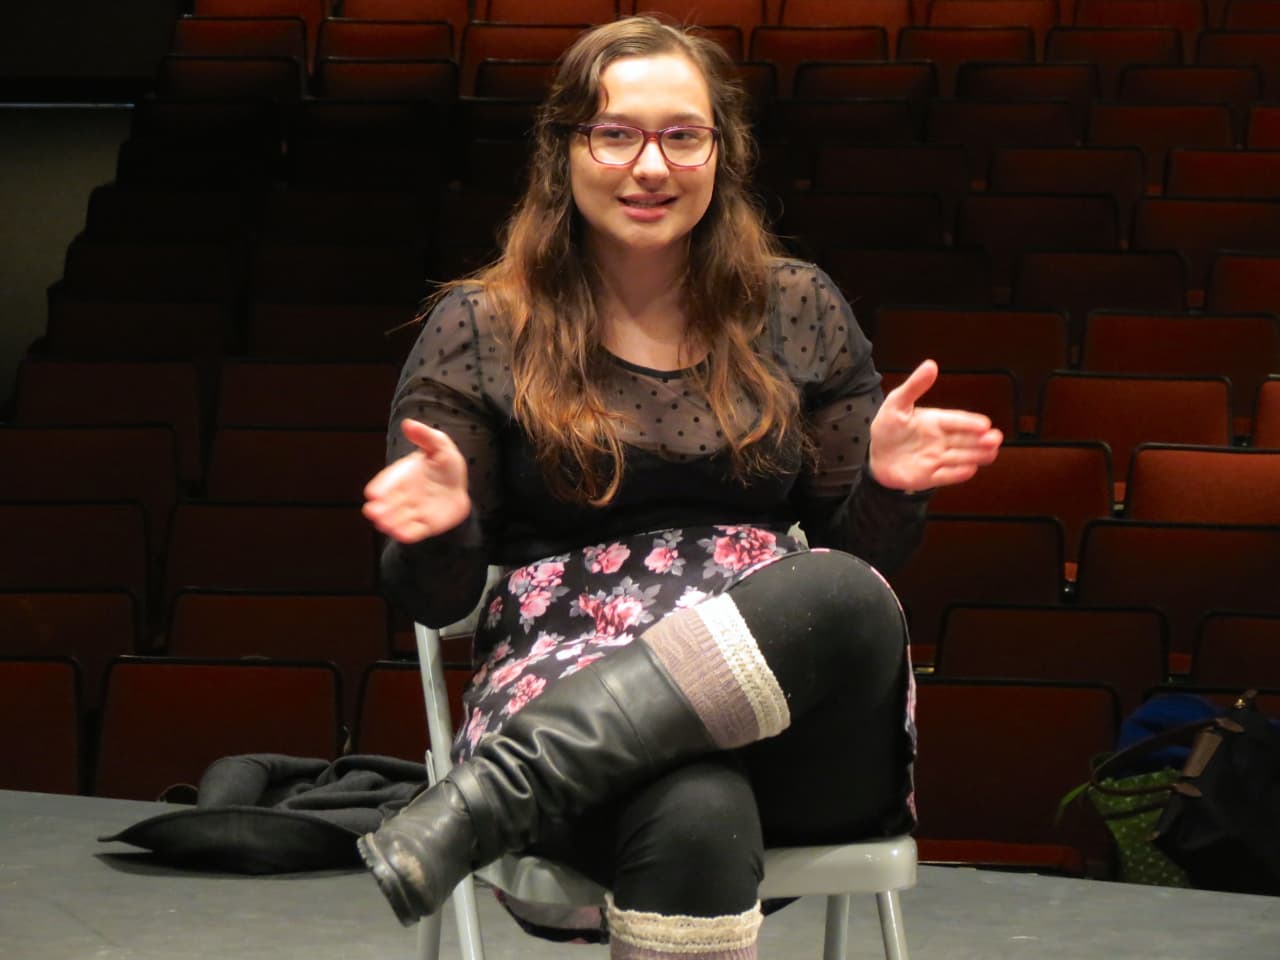 Briarcliff High School alum Emma Flihan discusses her experience studying playwriting at New York University and work in the industry.